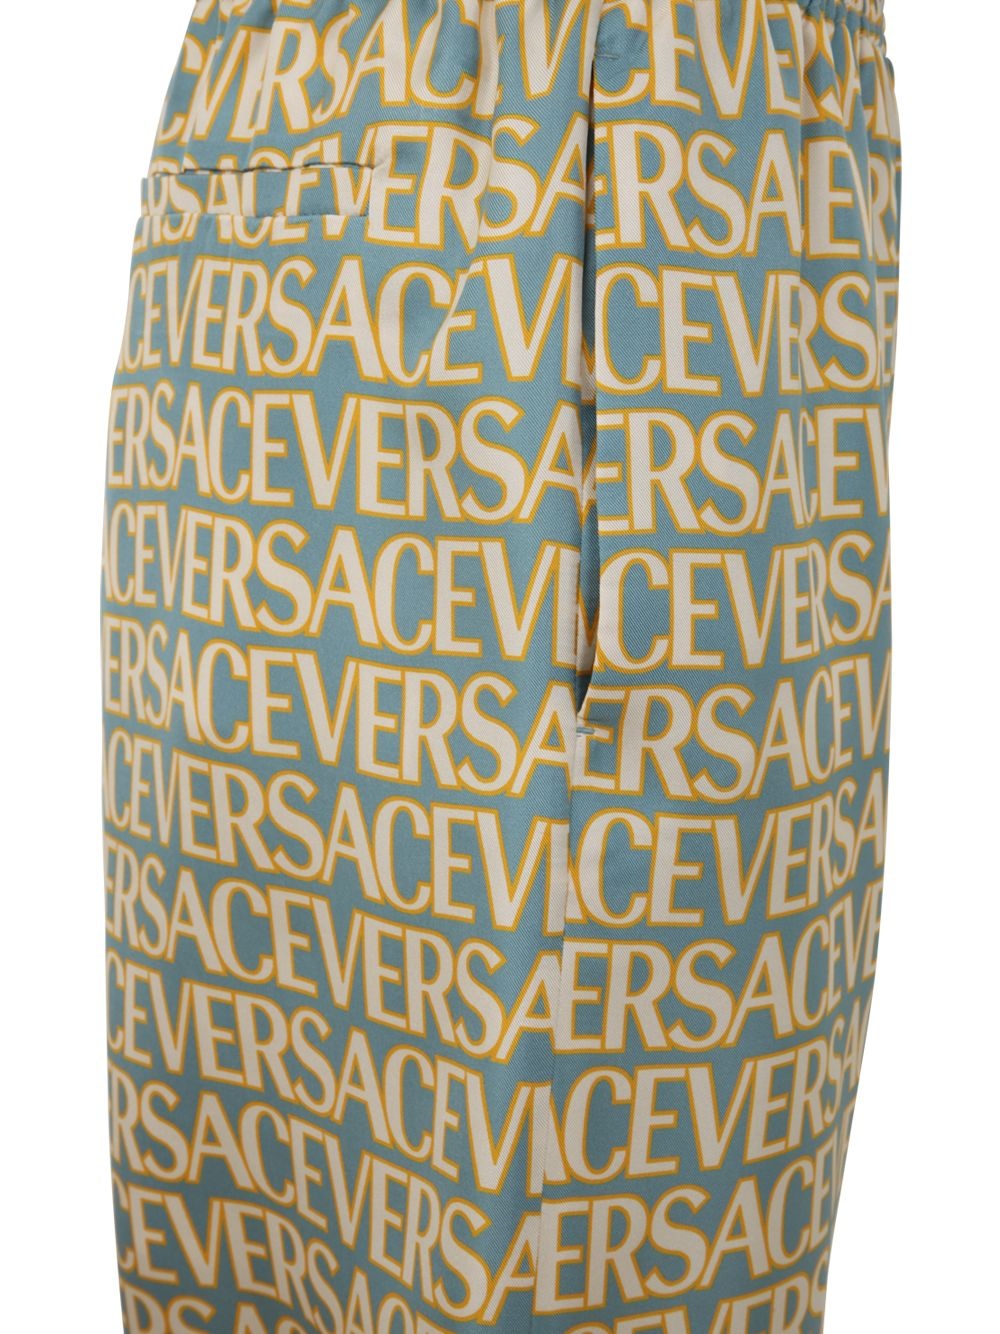 SHORTS SILK FABRIC WITH VERSACE ALL OVER PRINT - 3